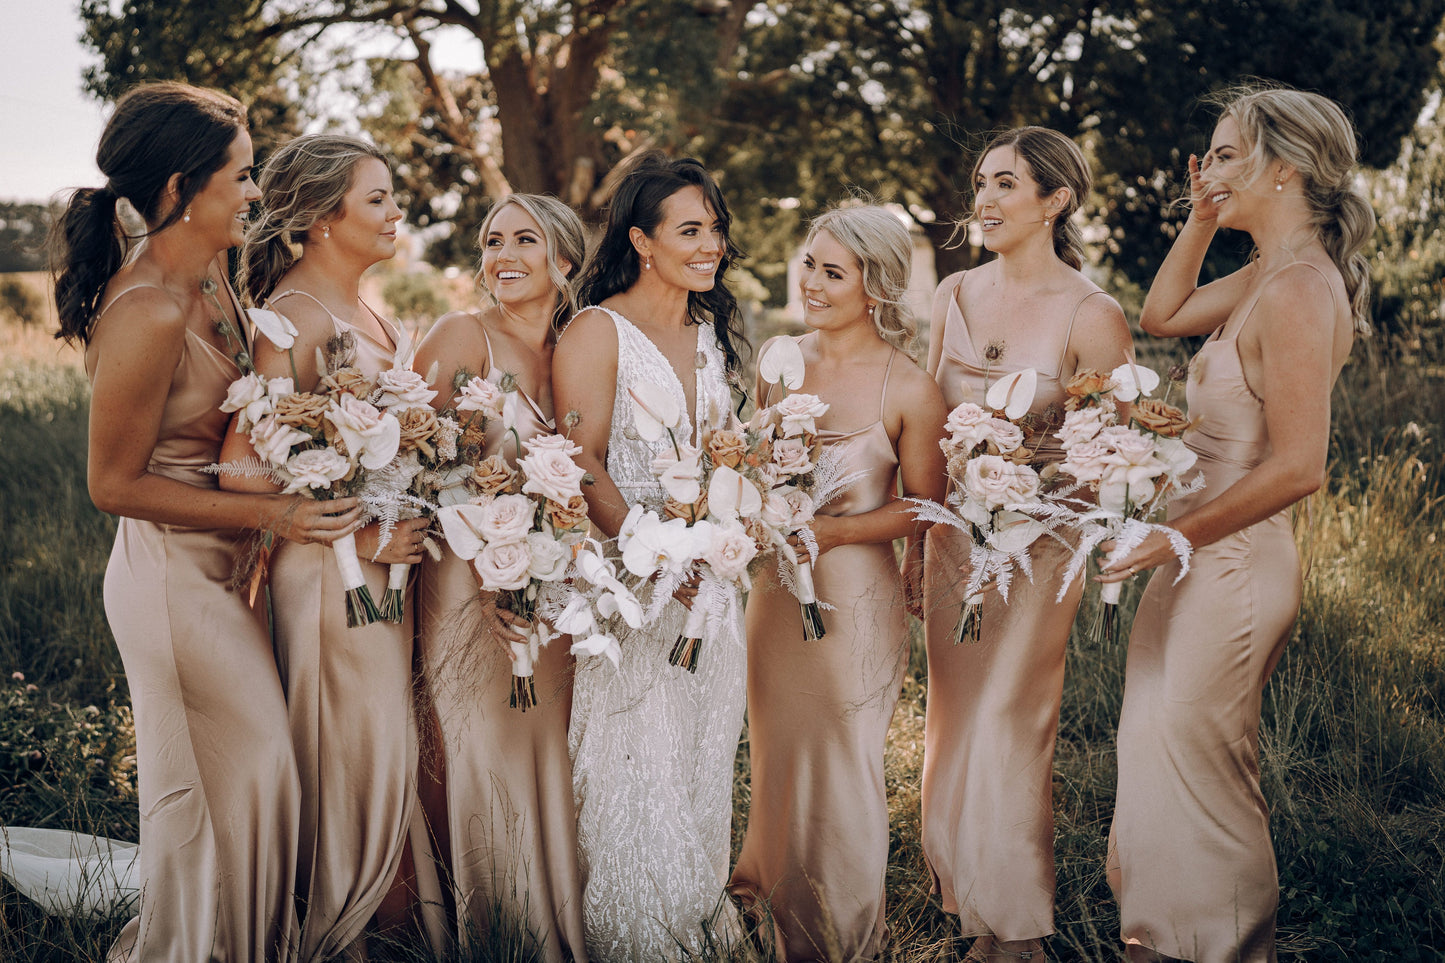 Photograph of smiling brides maids with the bride in white in the middle, they are holding lavish flowers in soft pink and neutral tones